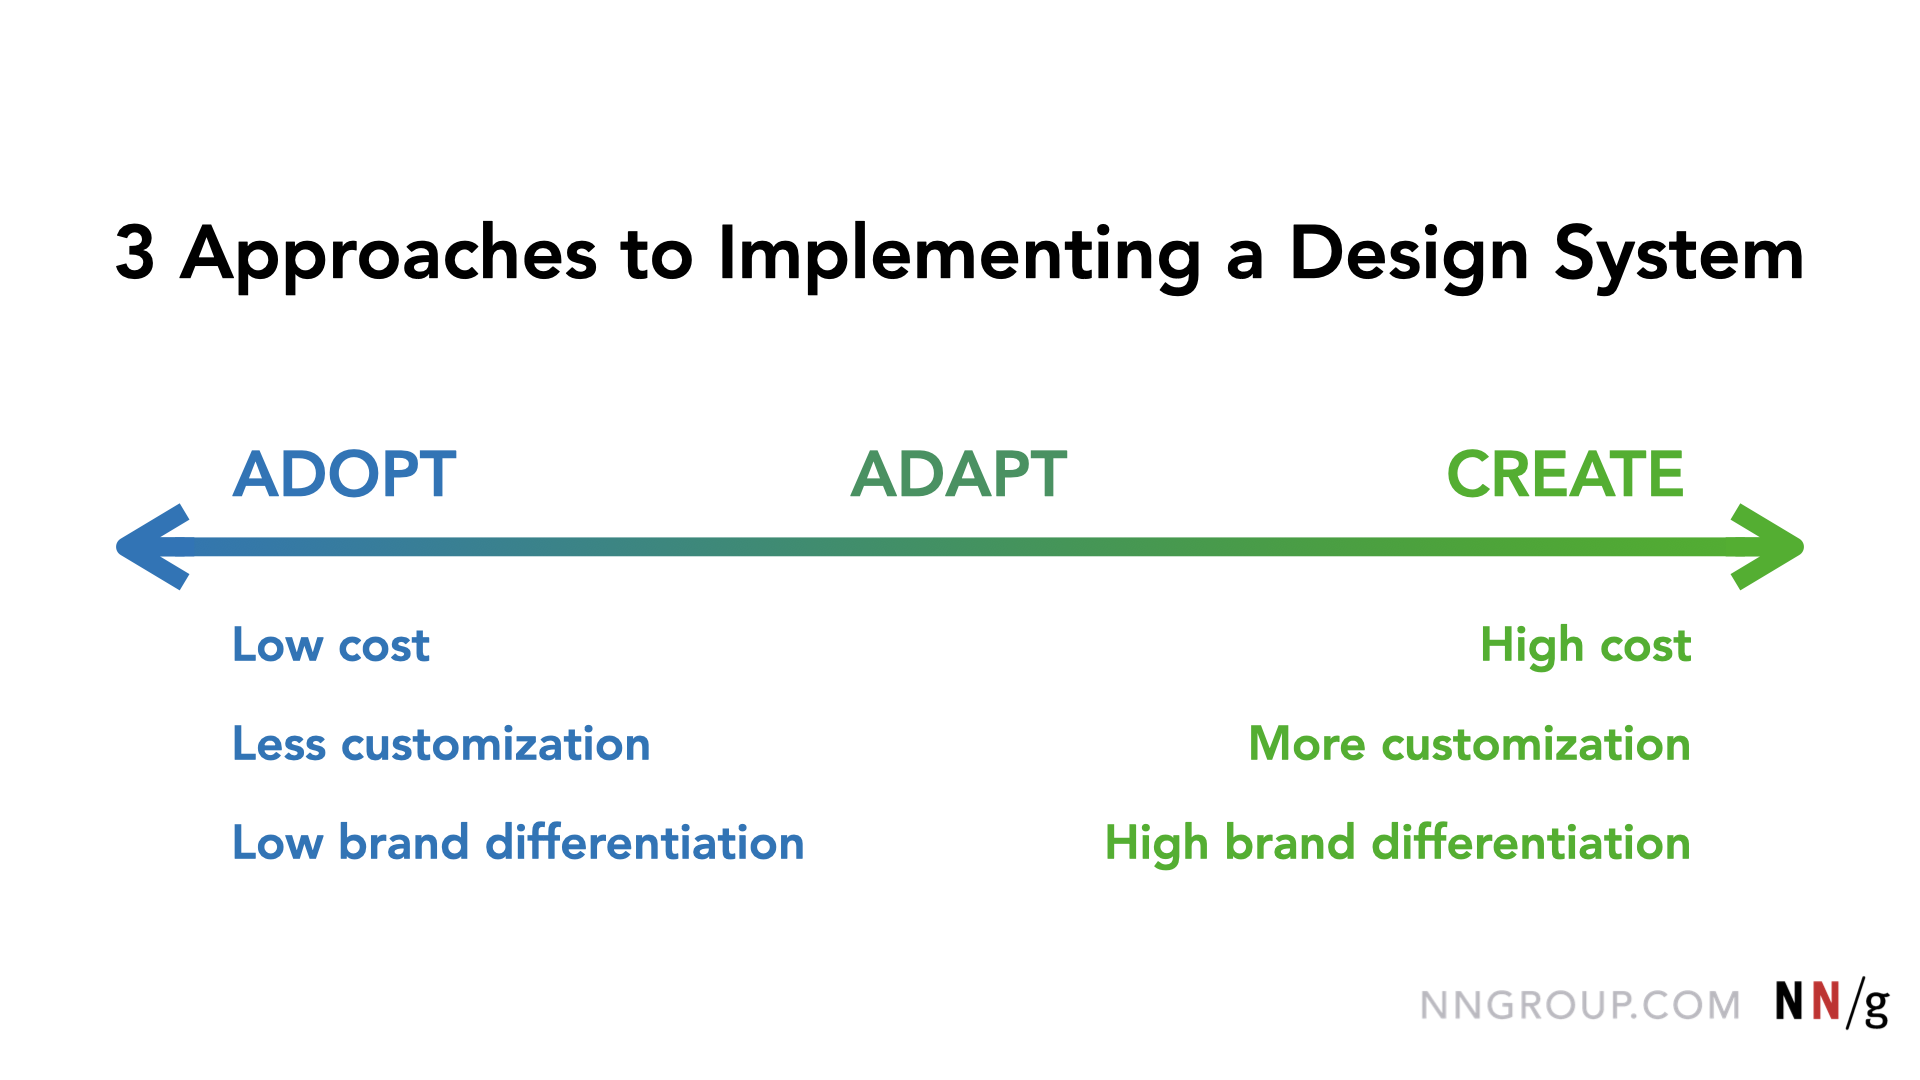 3 Approaches to Implementing a Design System, from low to high control, cost, and brand differentiation: Adopt, Adapt, and Create